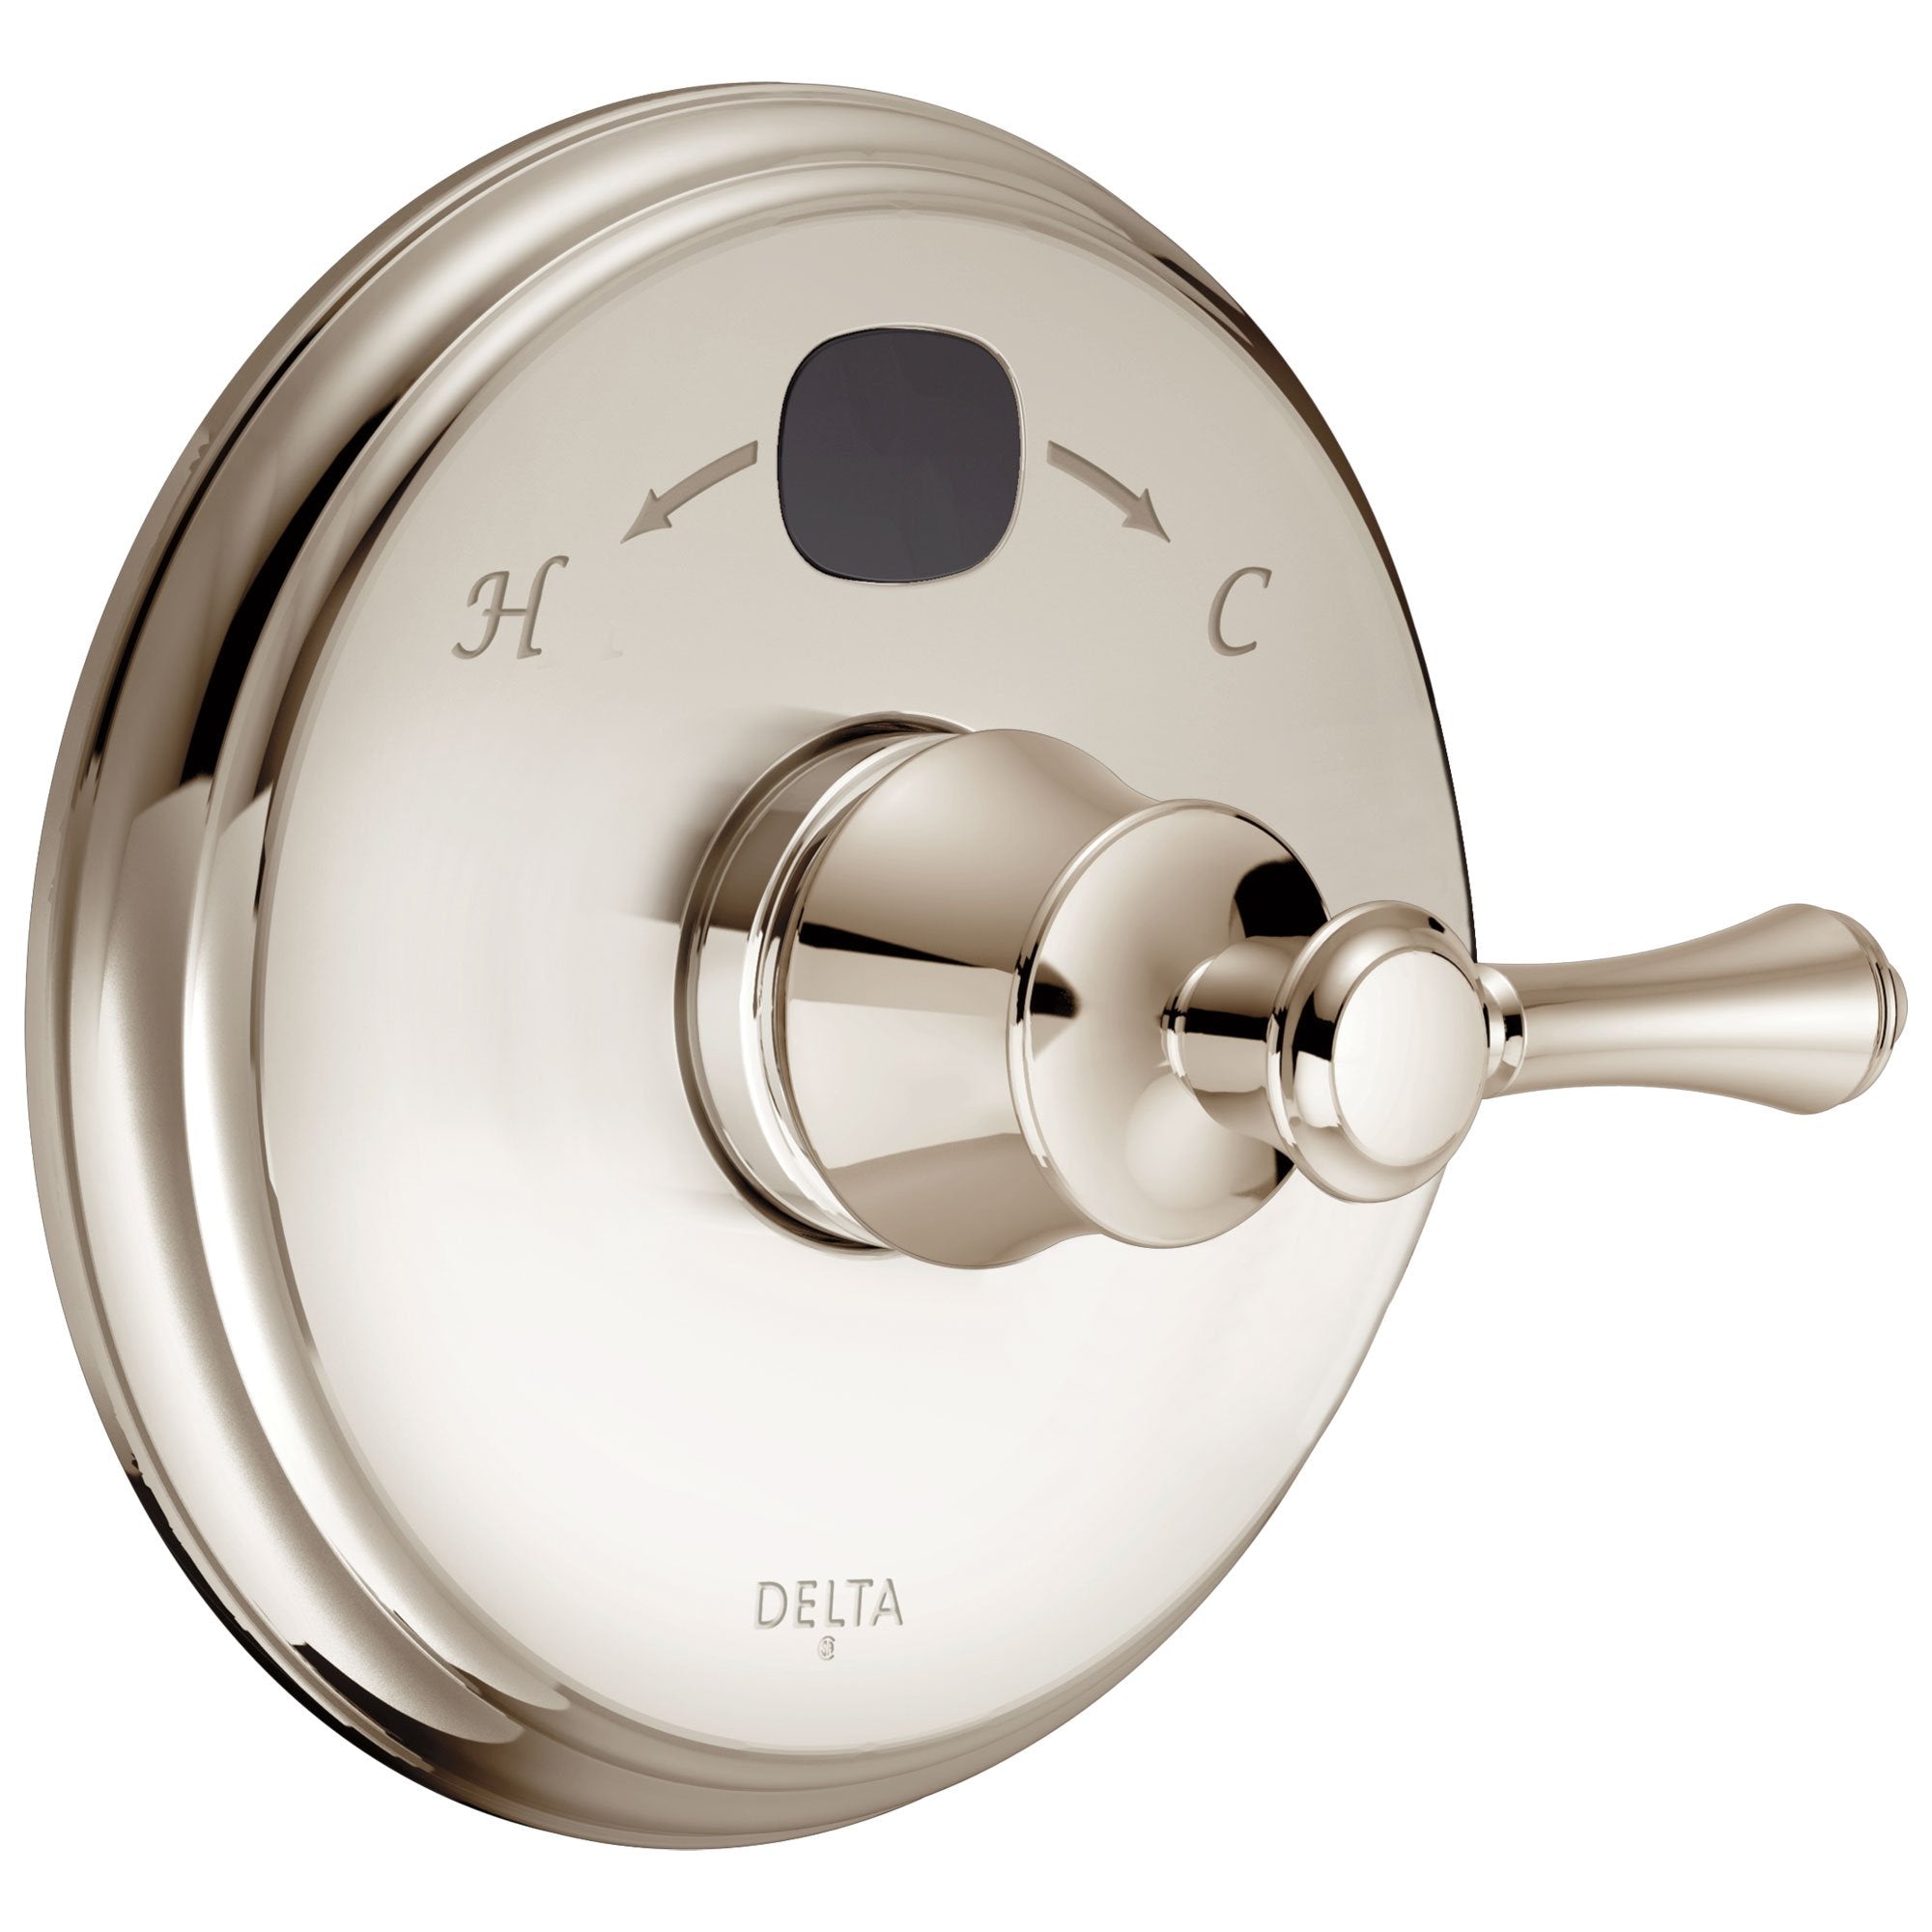 Delta Polished Nickel Cassidy Collection 14 Series Digital Display Temp2O Shower Valve Control COMPLETE with Single Lever Handle and Valve without Stops D1681V